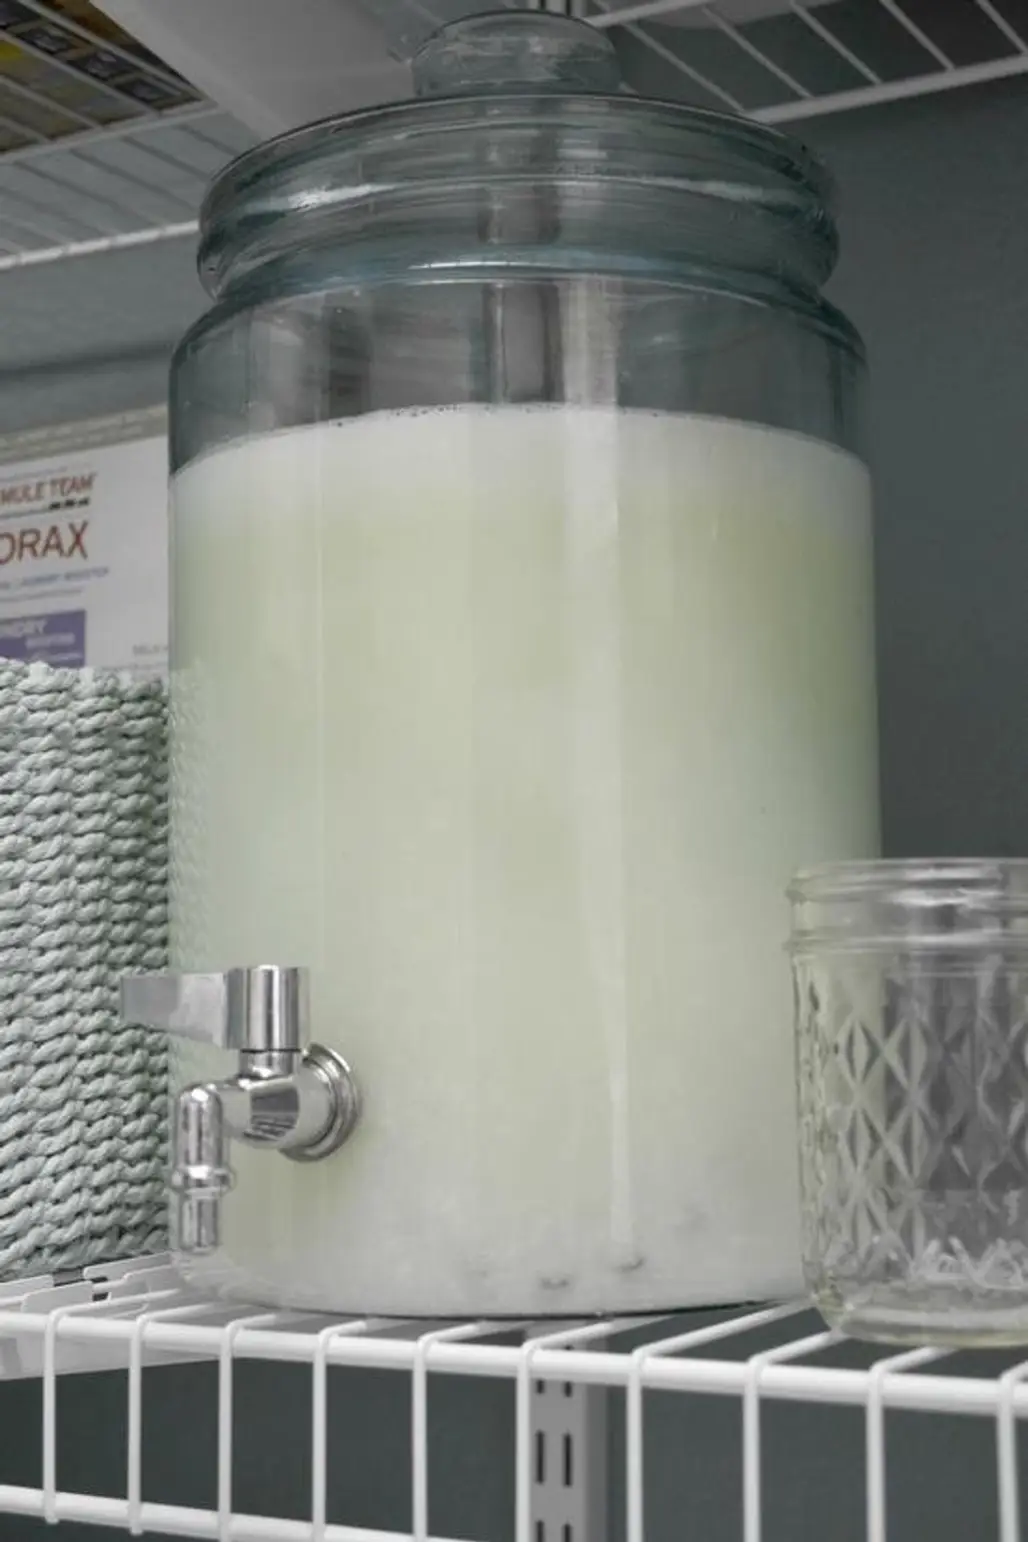 Use a Drink Dispenser for Laundry Detergent